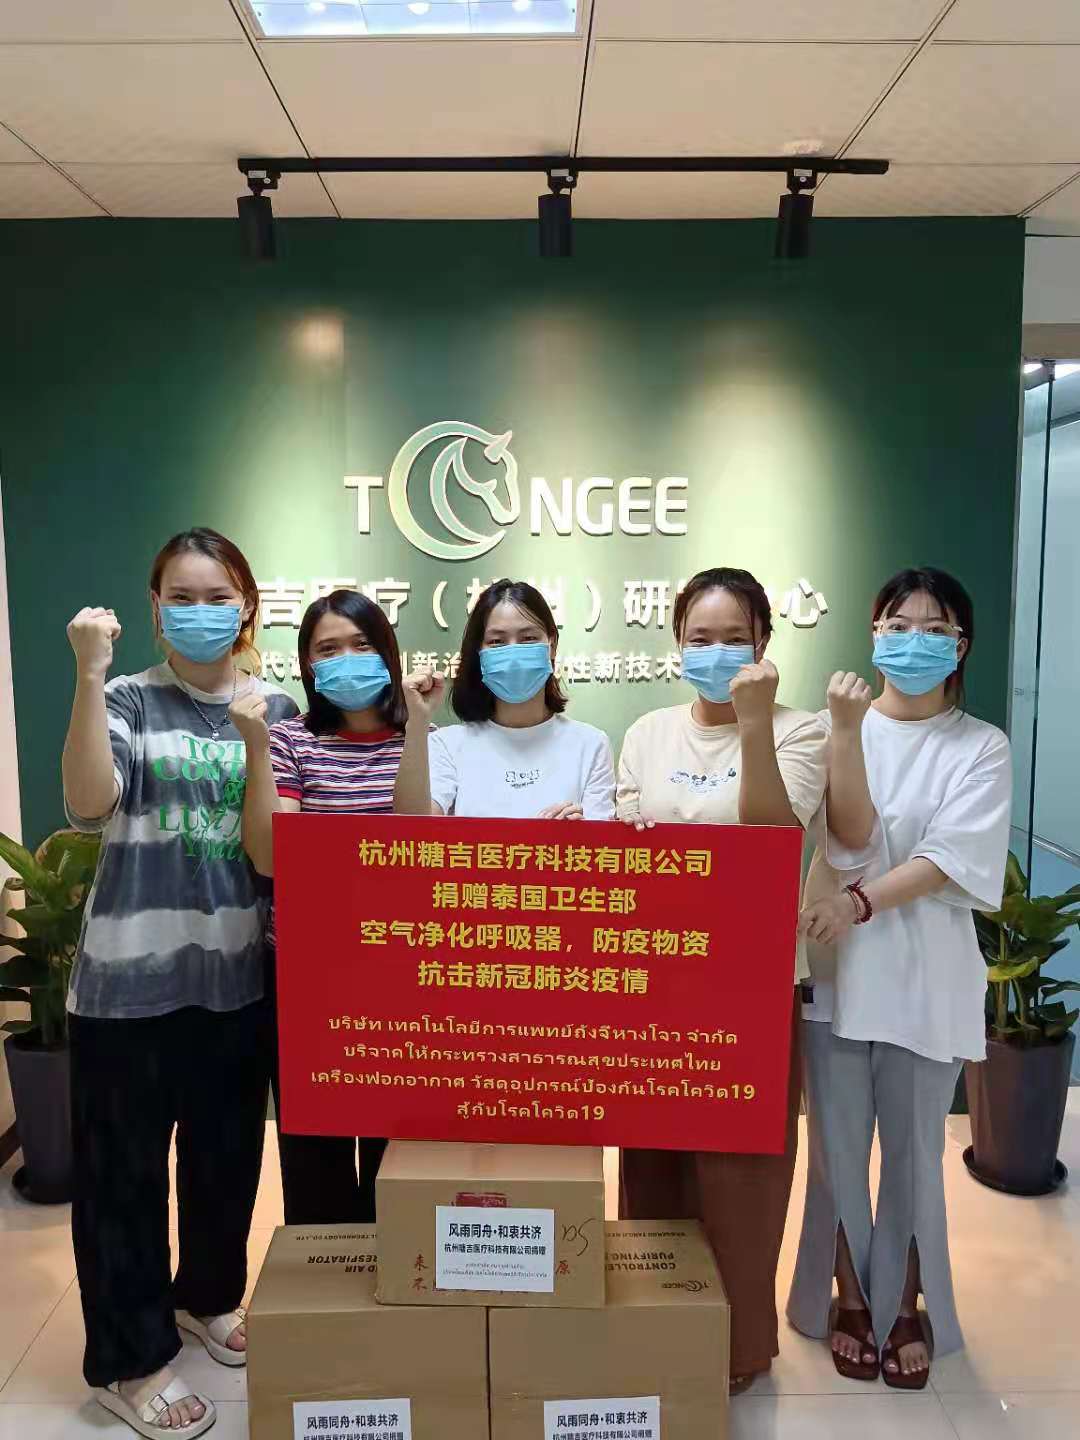 Tongee Company And The Ministry Of Health Of Thailand To Jointly Fight Against Virus